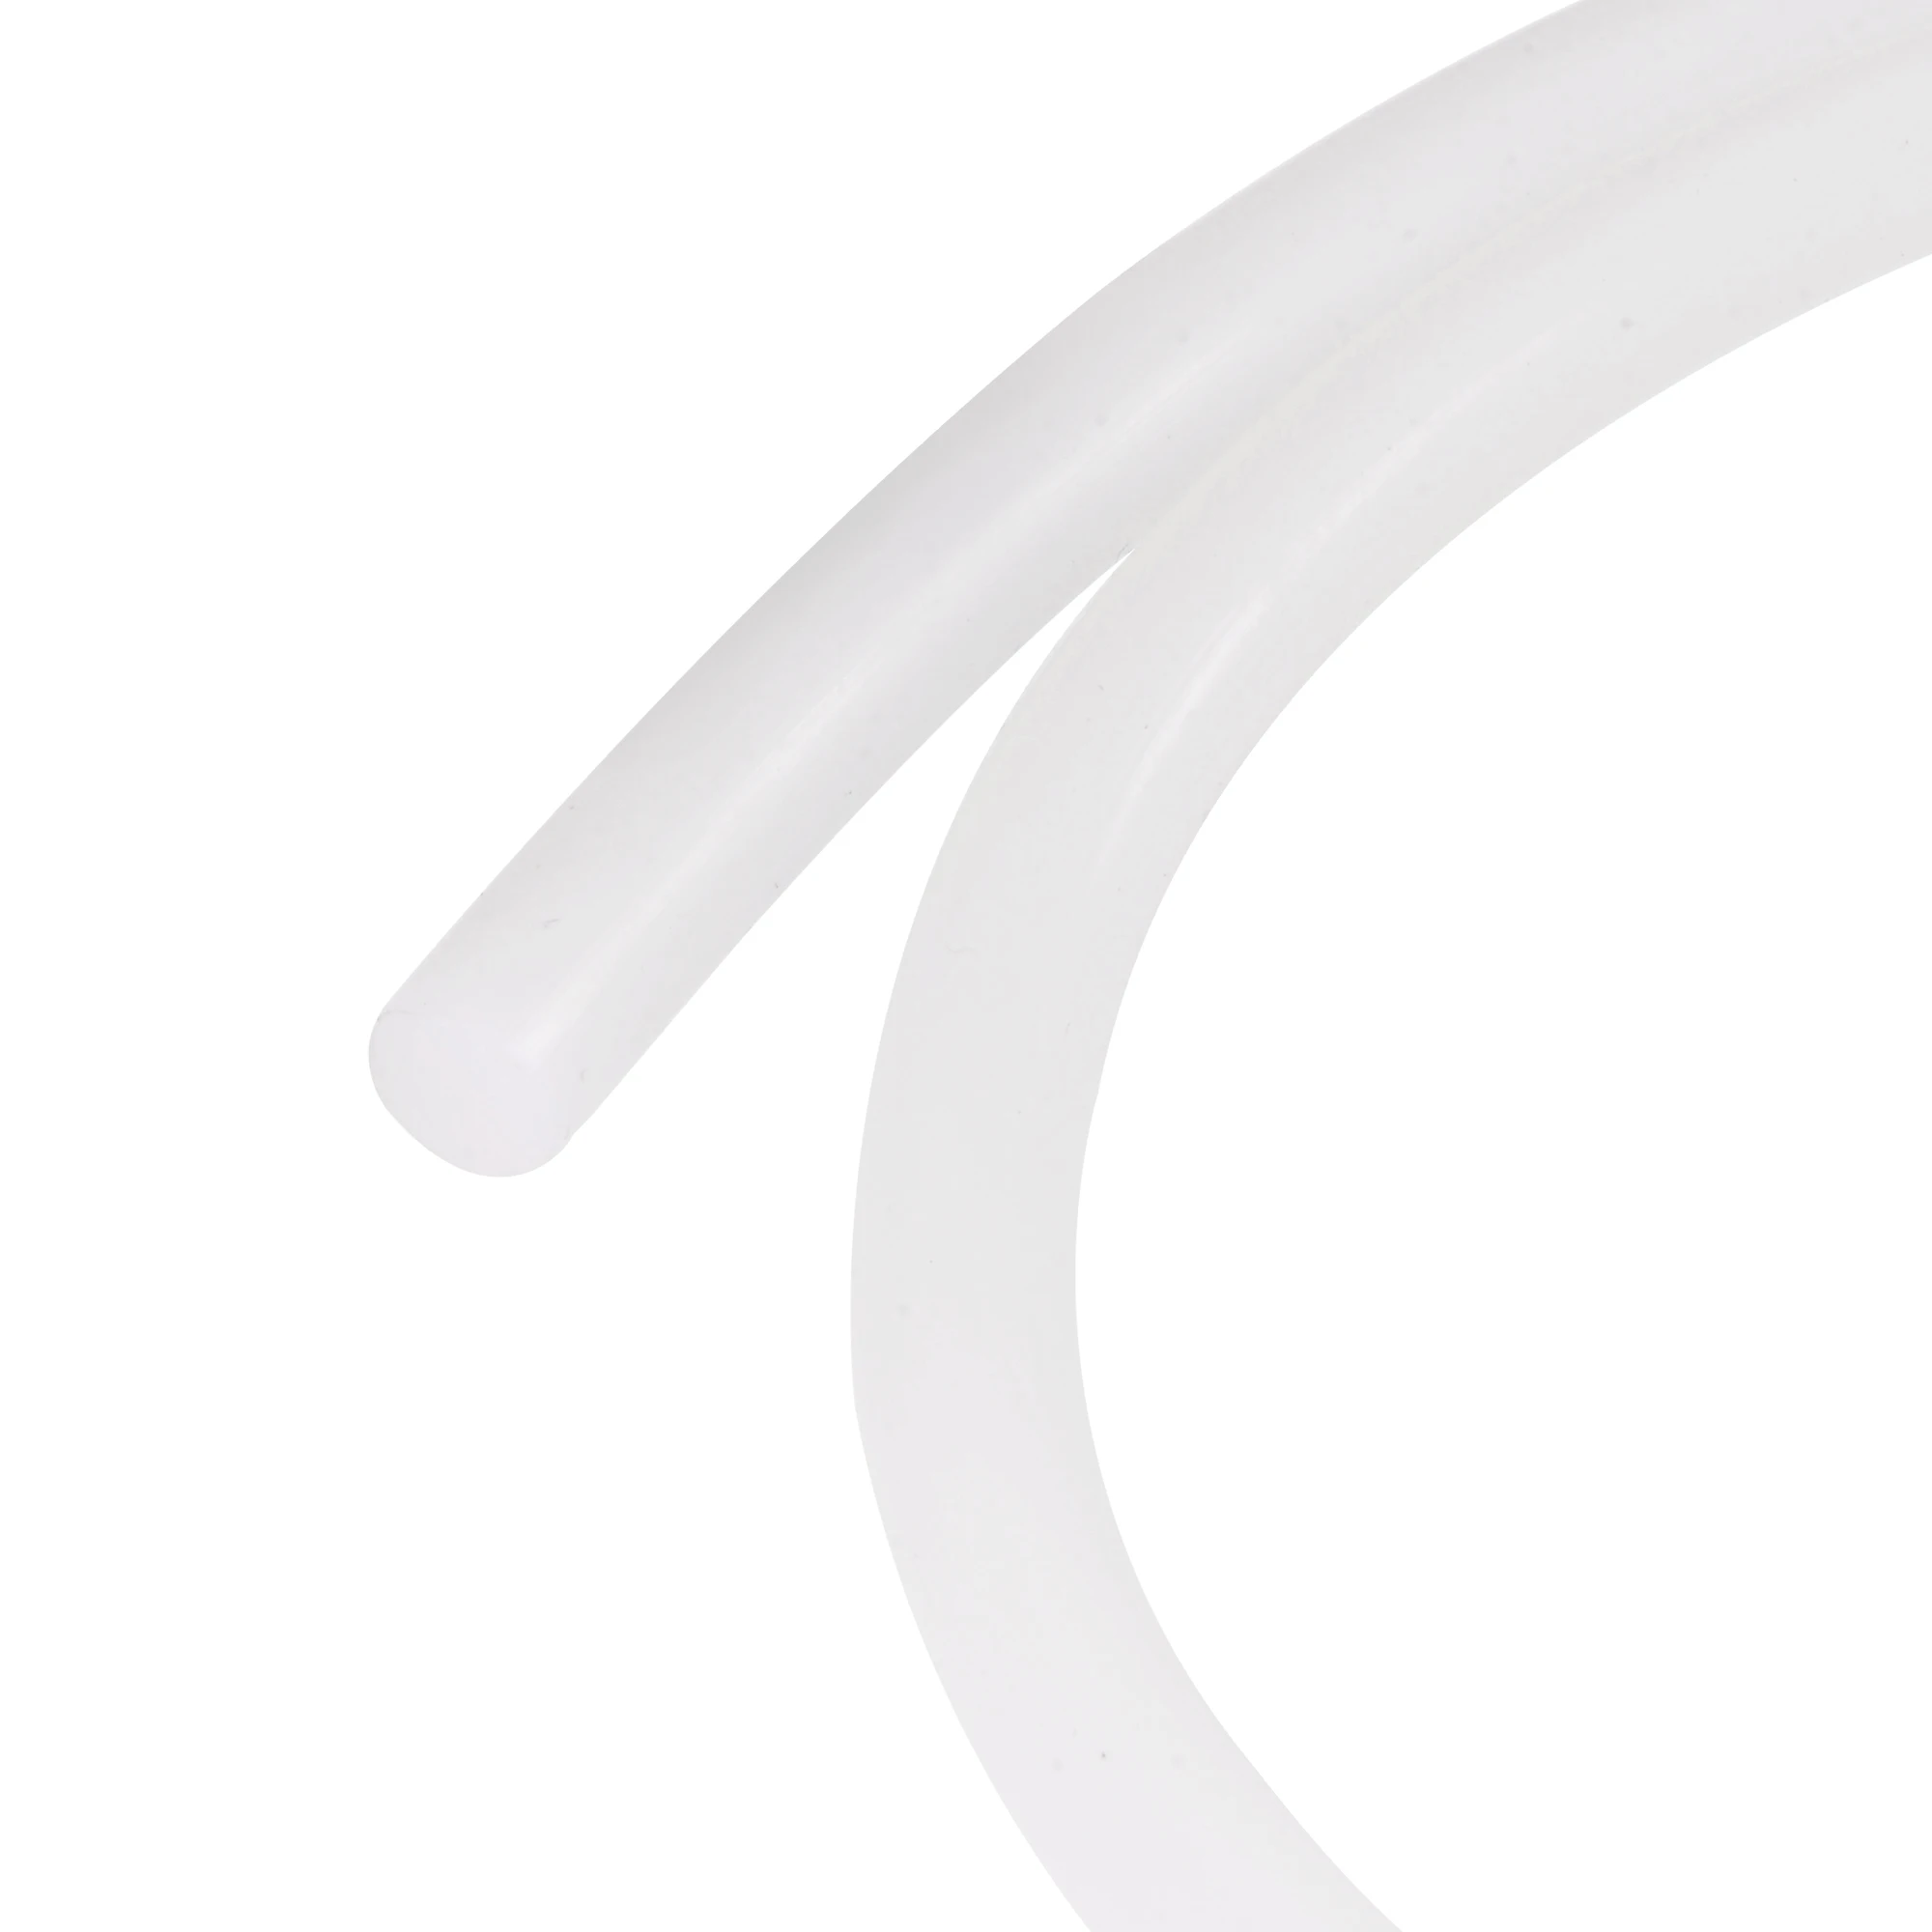 Uxcell Silicone Bending Insert Hard Tube 3/8 5ft White Soft for Rigid PETG Tubing Water Cooling barrow pmma petg hard tube id8mm od12mm id10mm od14mm id12mm od16mm length 50cm transparent pipe acrylic petg tube 2pcs lots